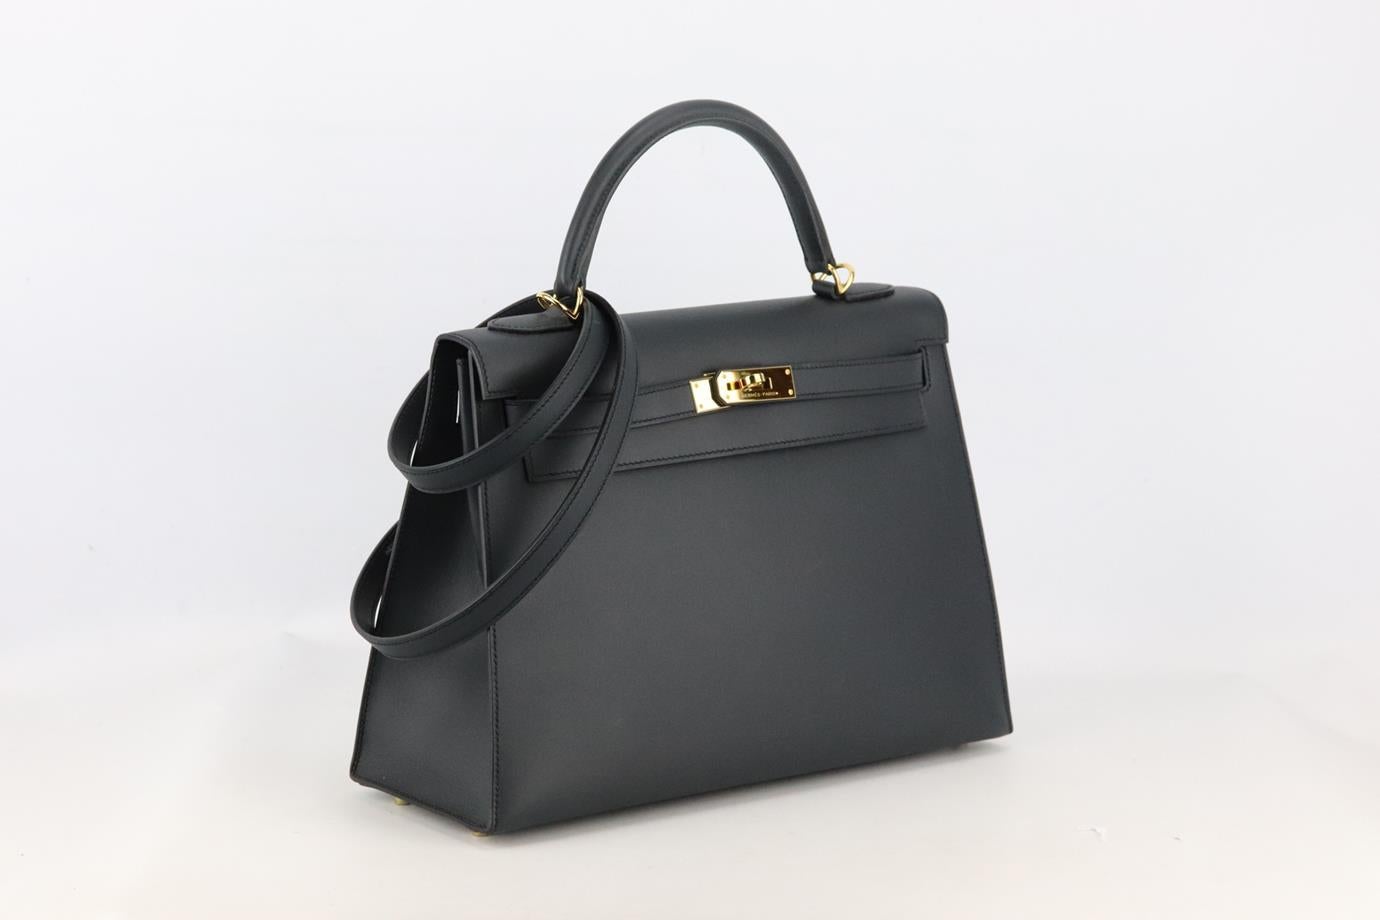 Hermès 2015 Kelly Sellier 32cm Sombrero leather bag. Made in France, this beautiful 2015 Hermès ‘Kelly Sellier’ handbag has been made from black ‘Sombrero’ leather exterior in ‘Noir’ with matching interior, this piece is decorated with gold-plated